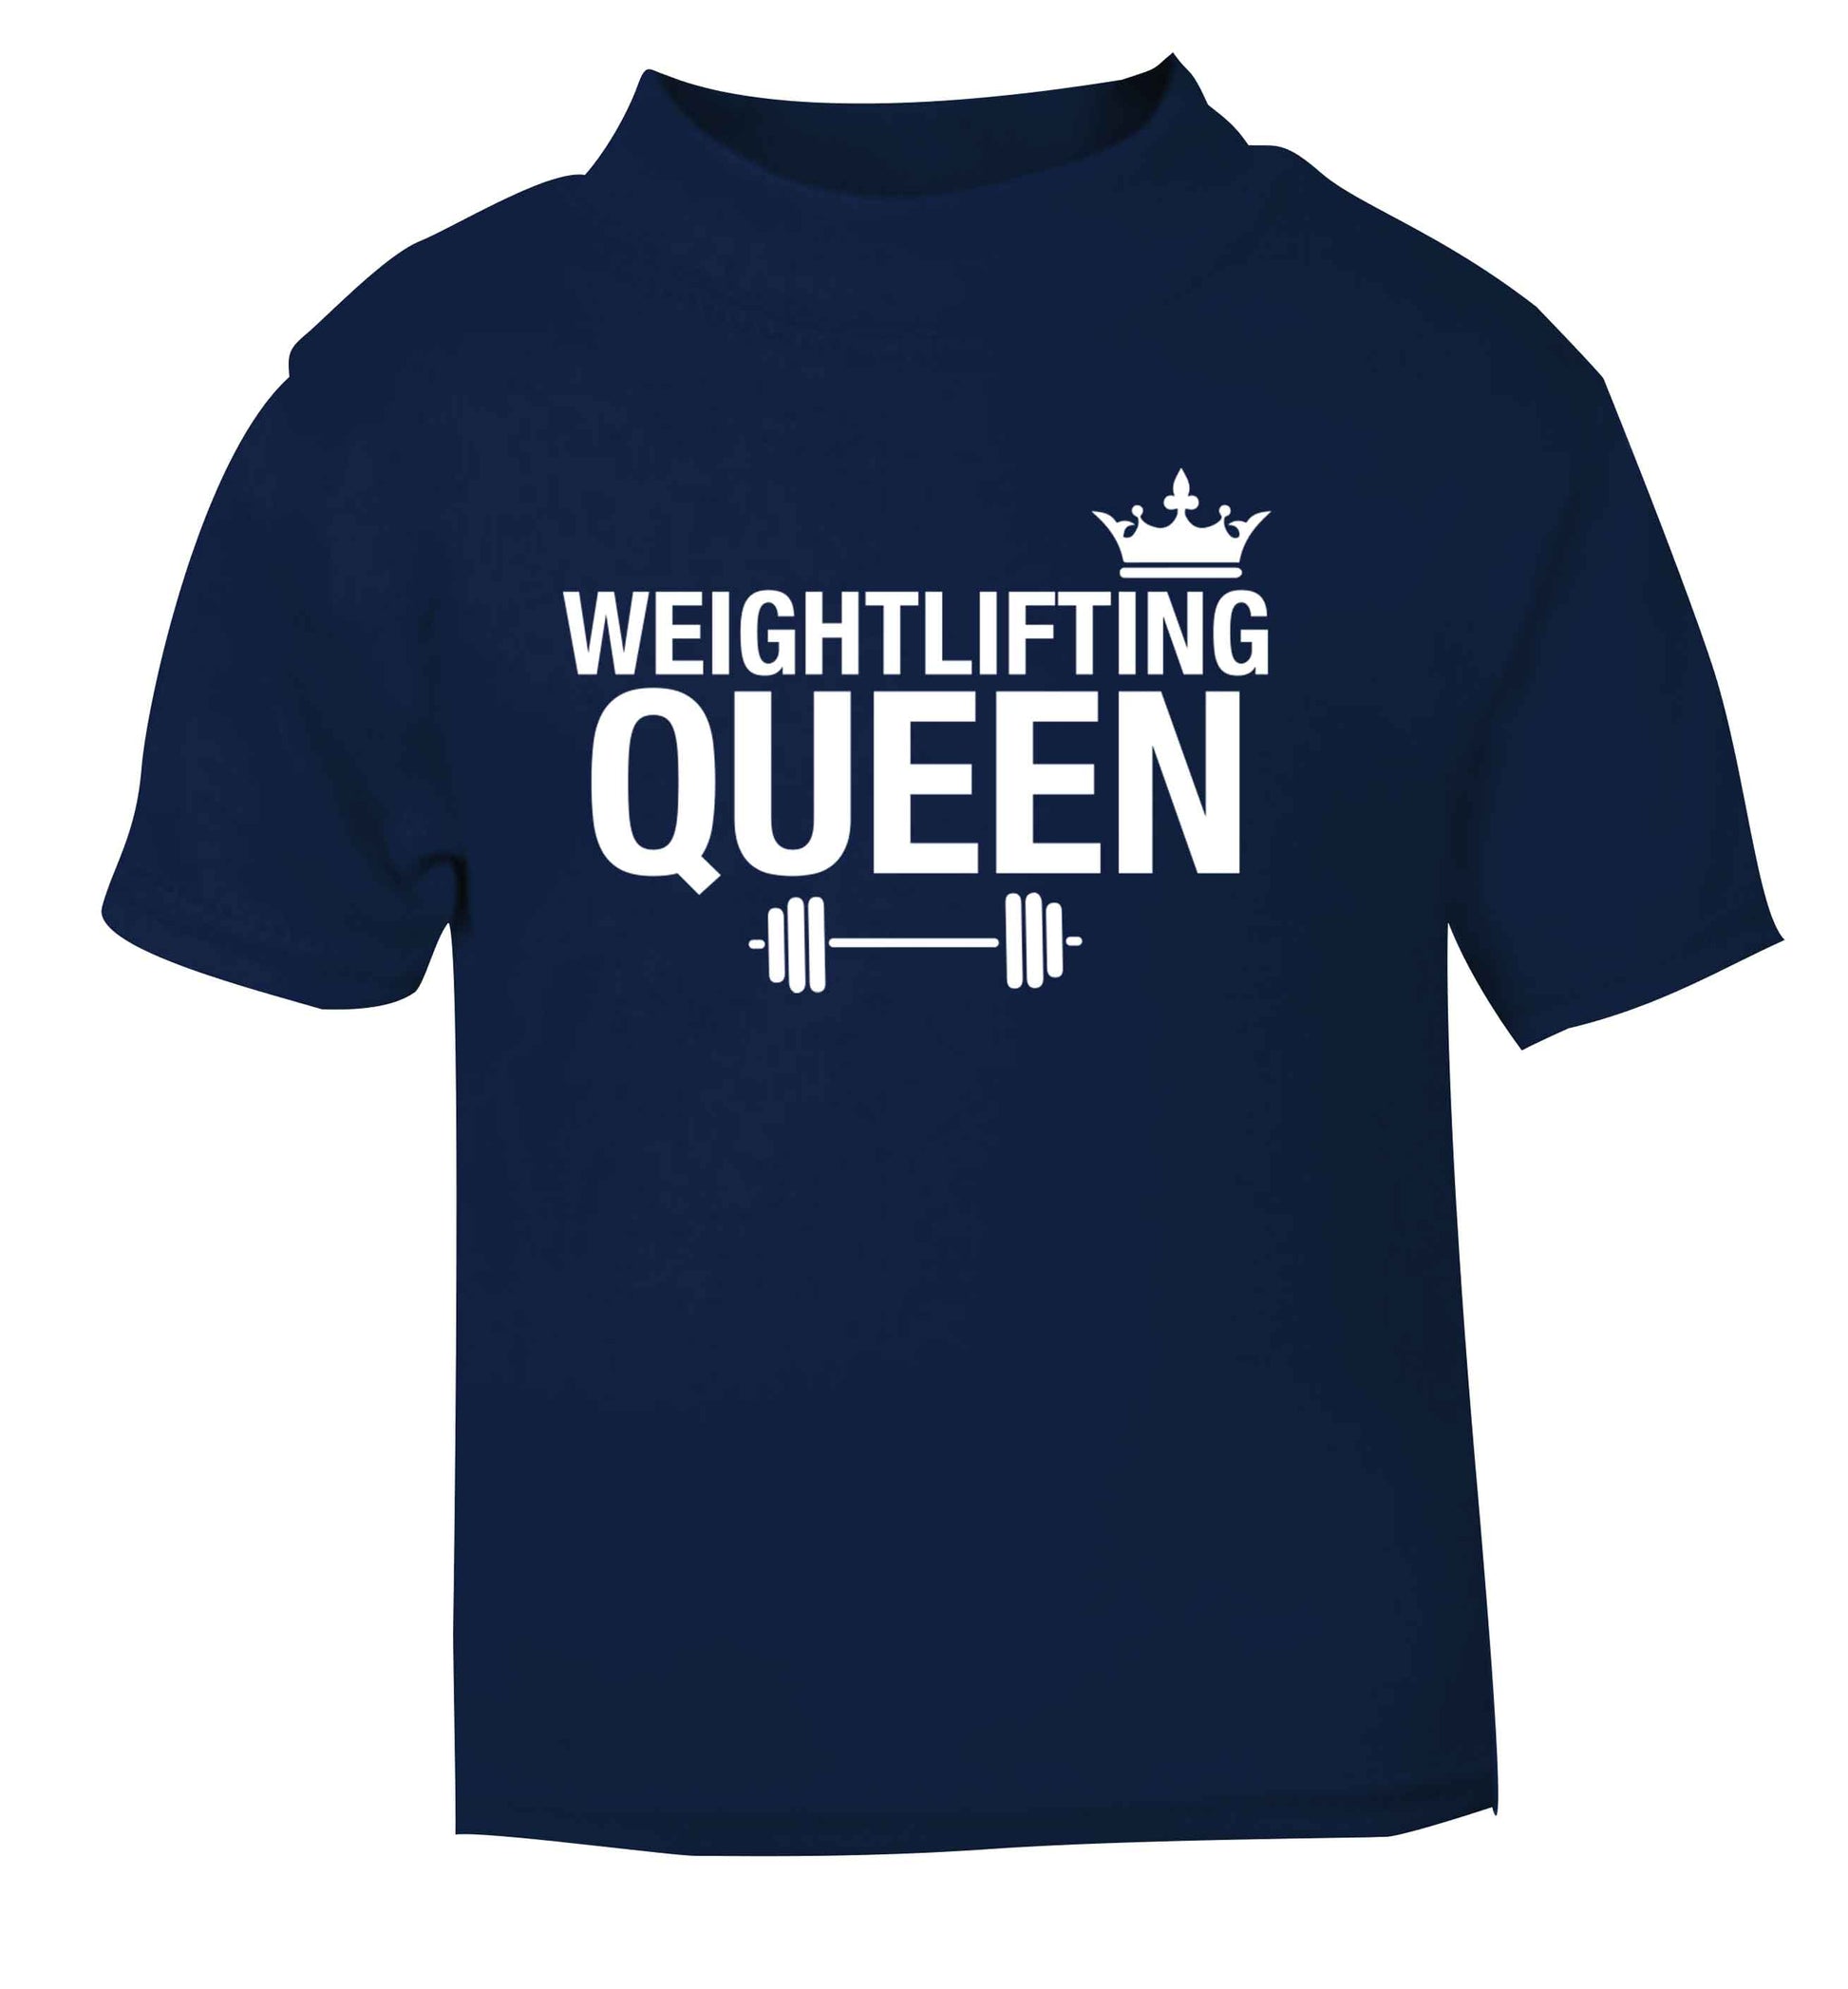 Weightlifting Queen navy Baby Toddler Tshirt 2 Years